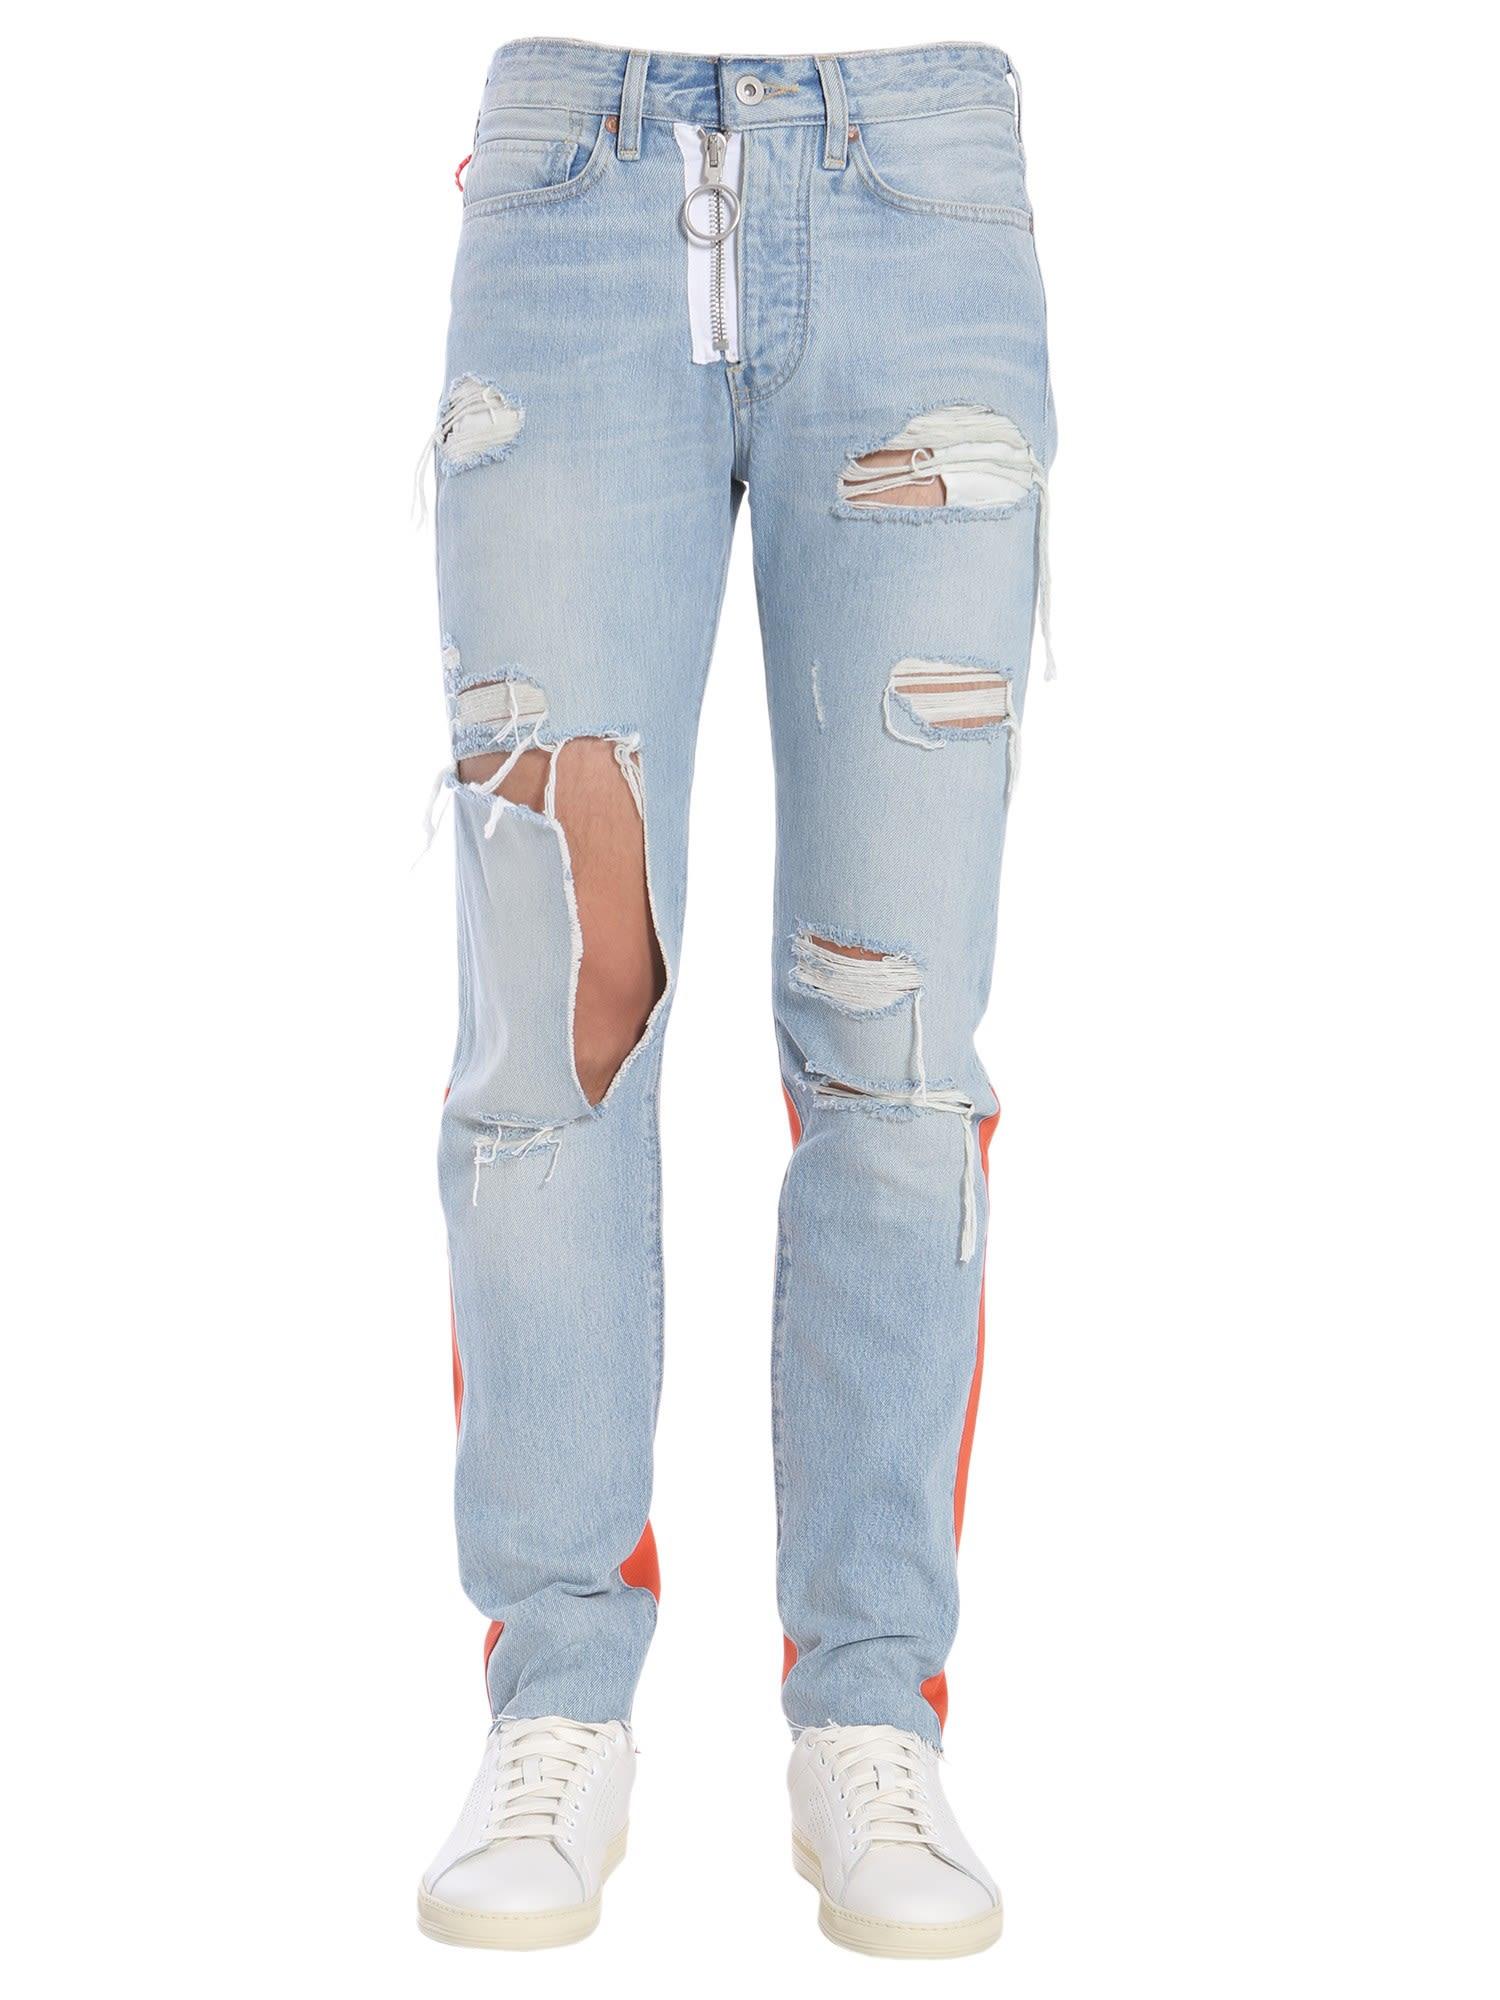 levis off white jeans